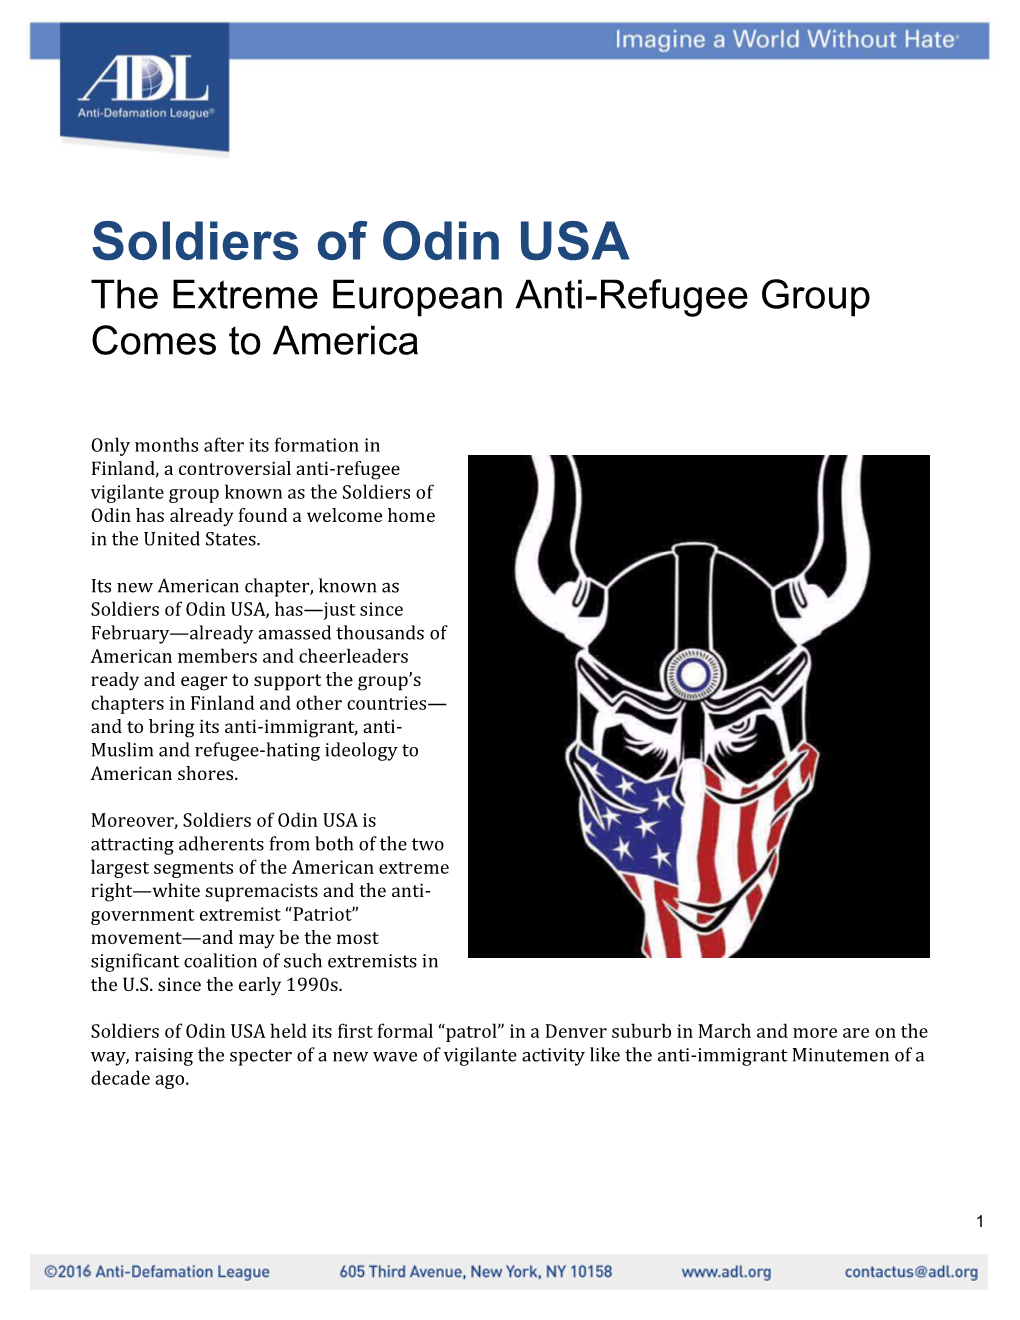 Soldiers of Odin USA the Extreme European Anti-Refugee Group Comes to America